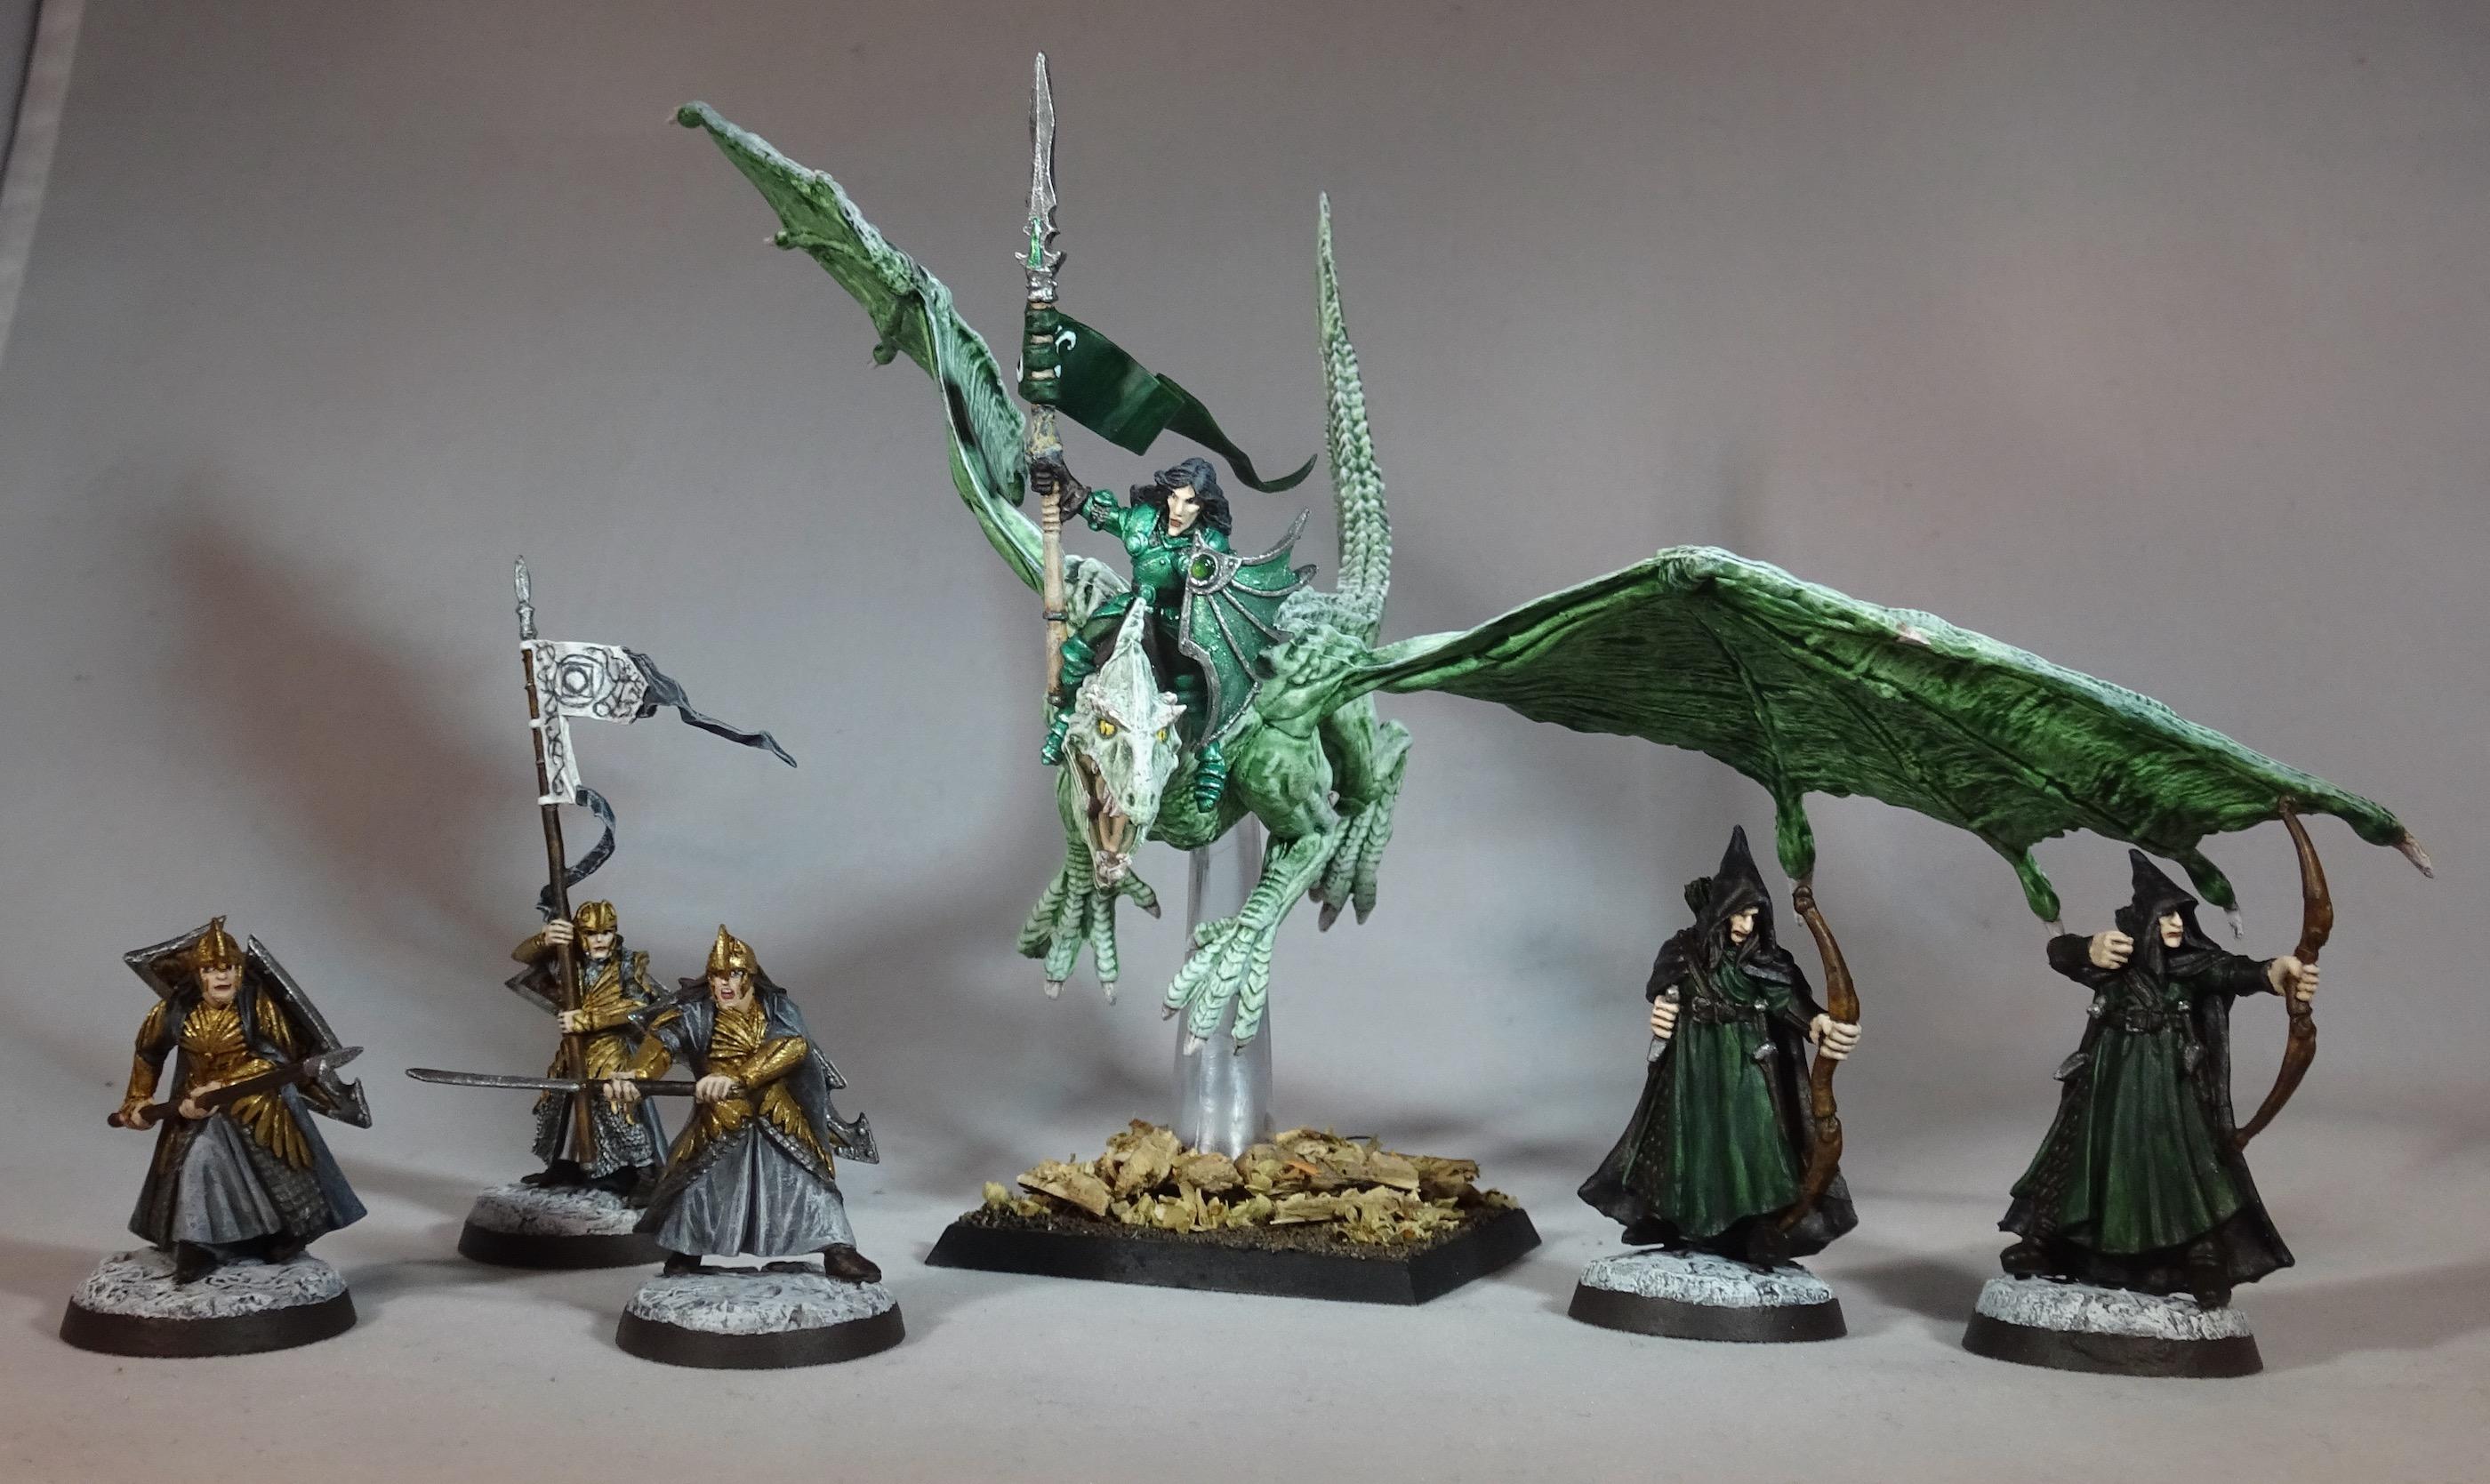 Some elves and a dragon